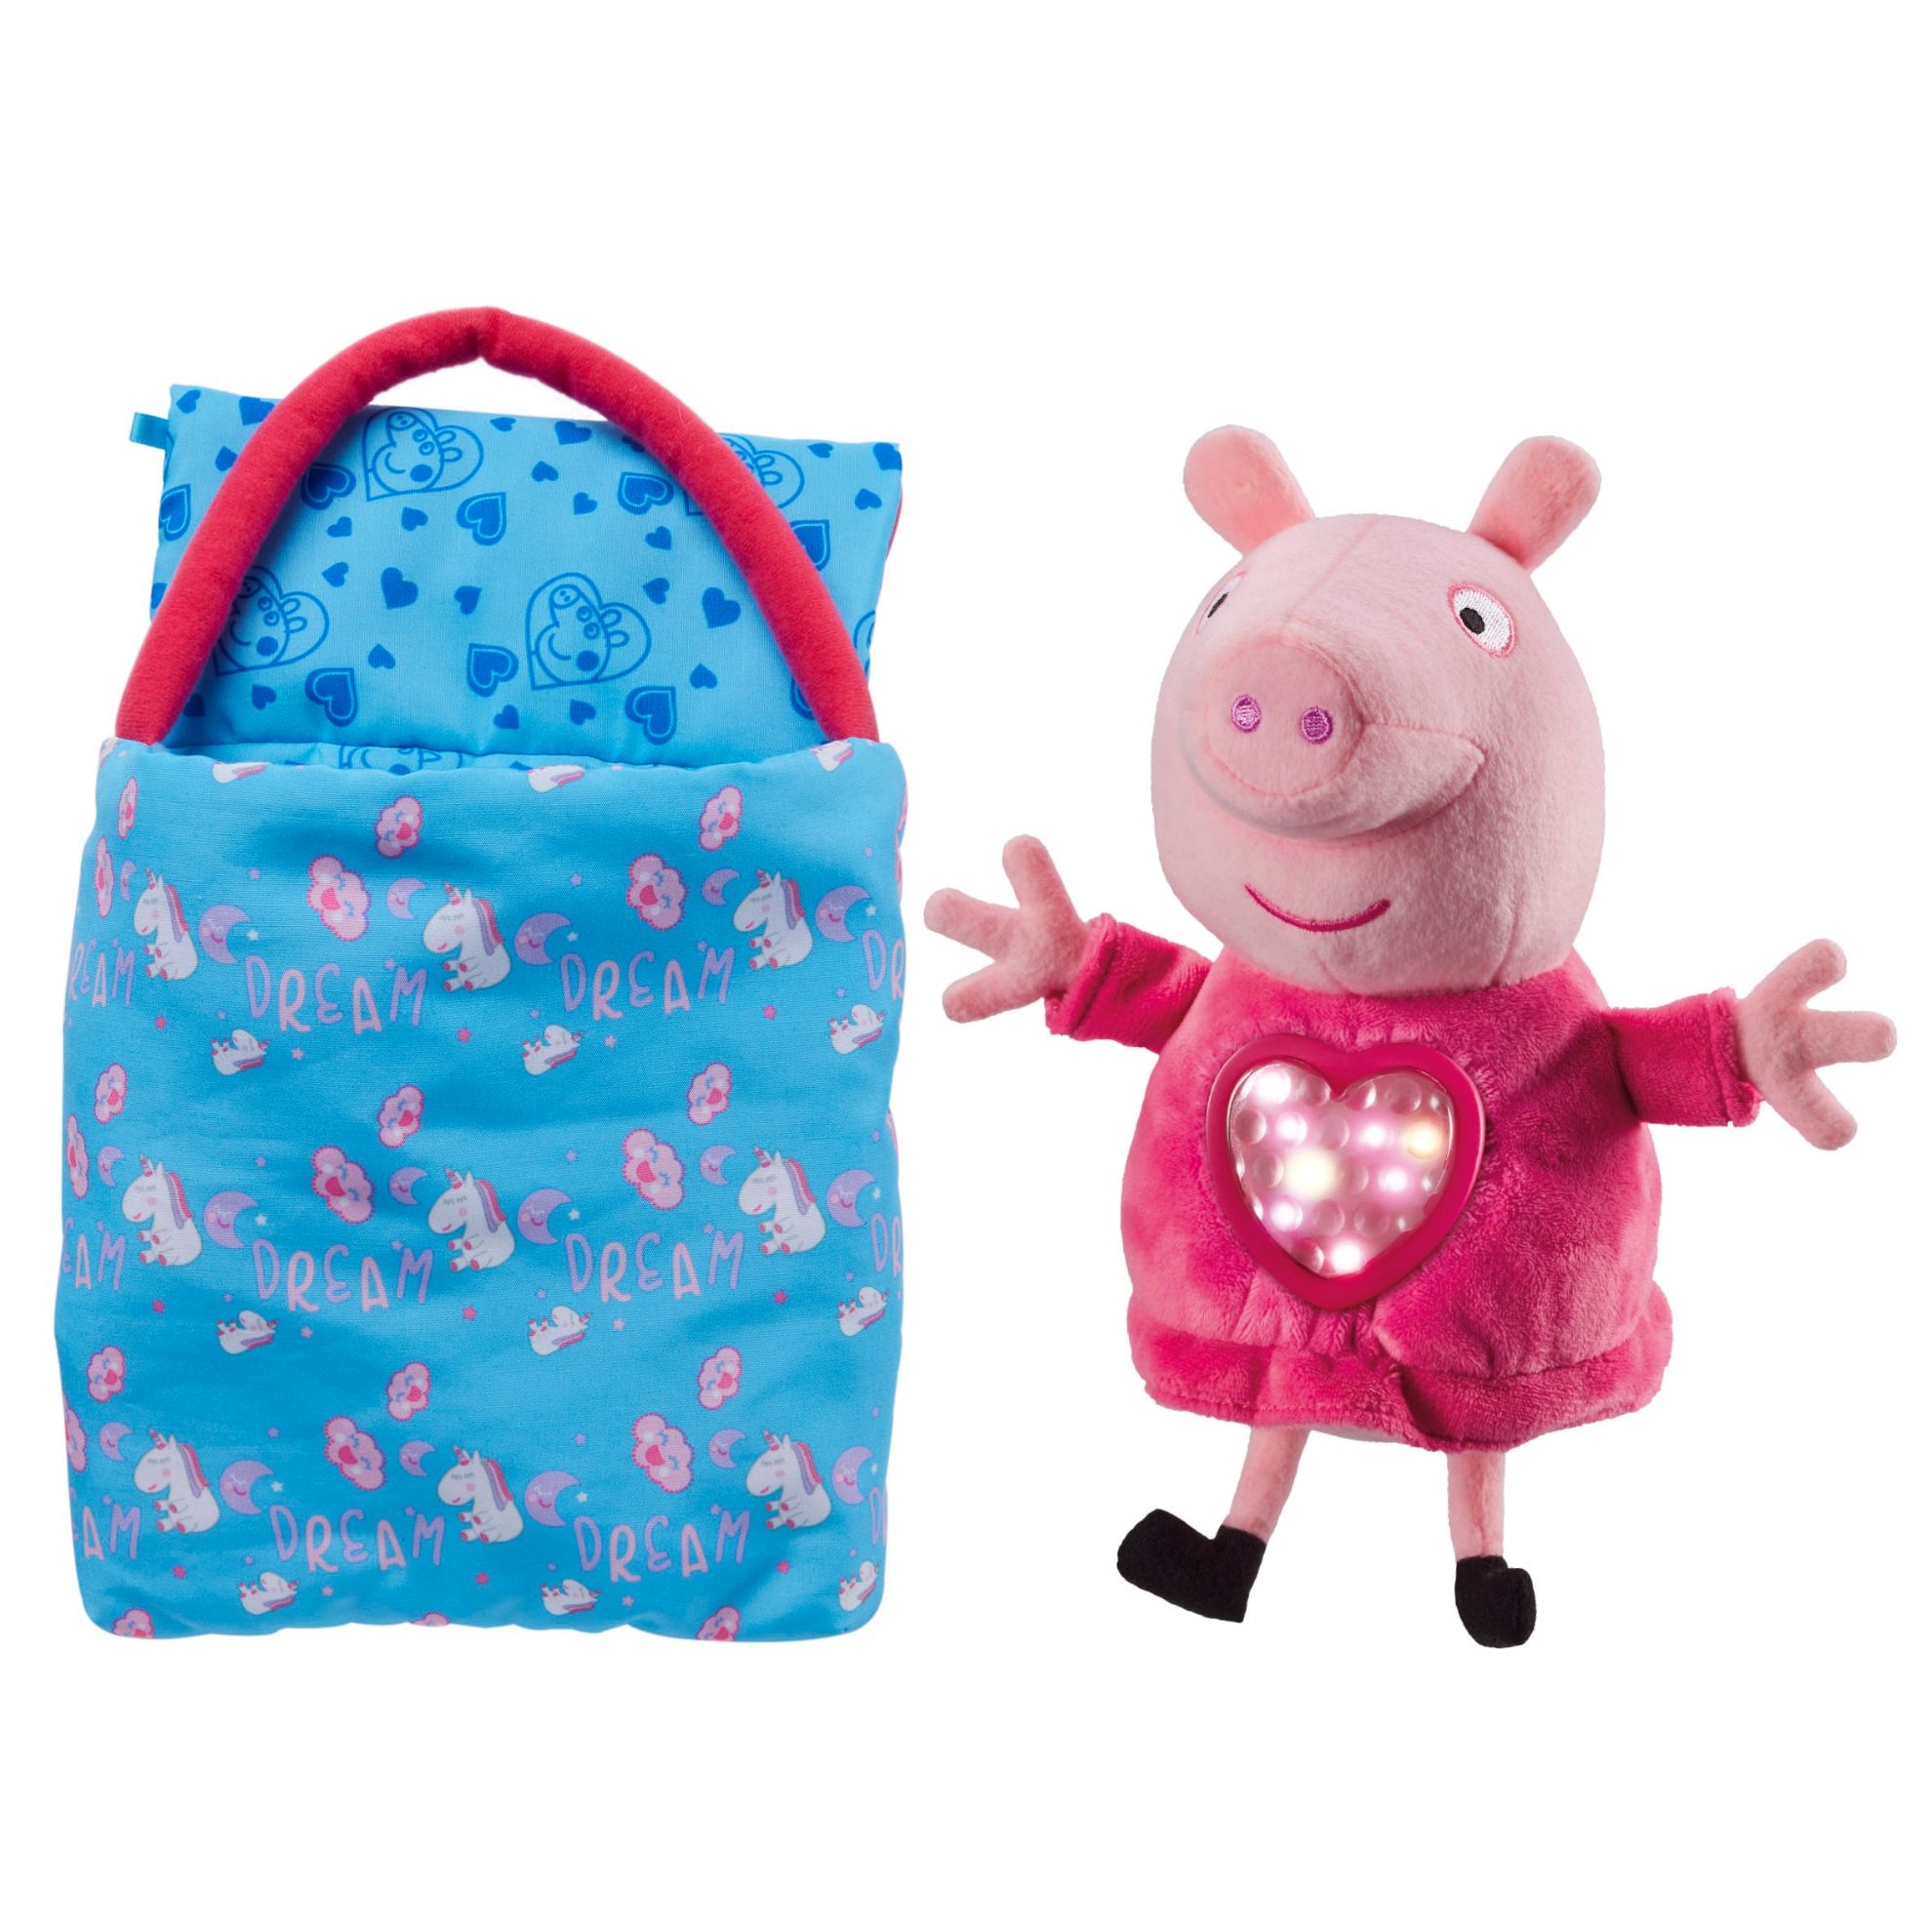 Picture of Peppa Pig Sleepover Peppa toy